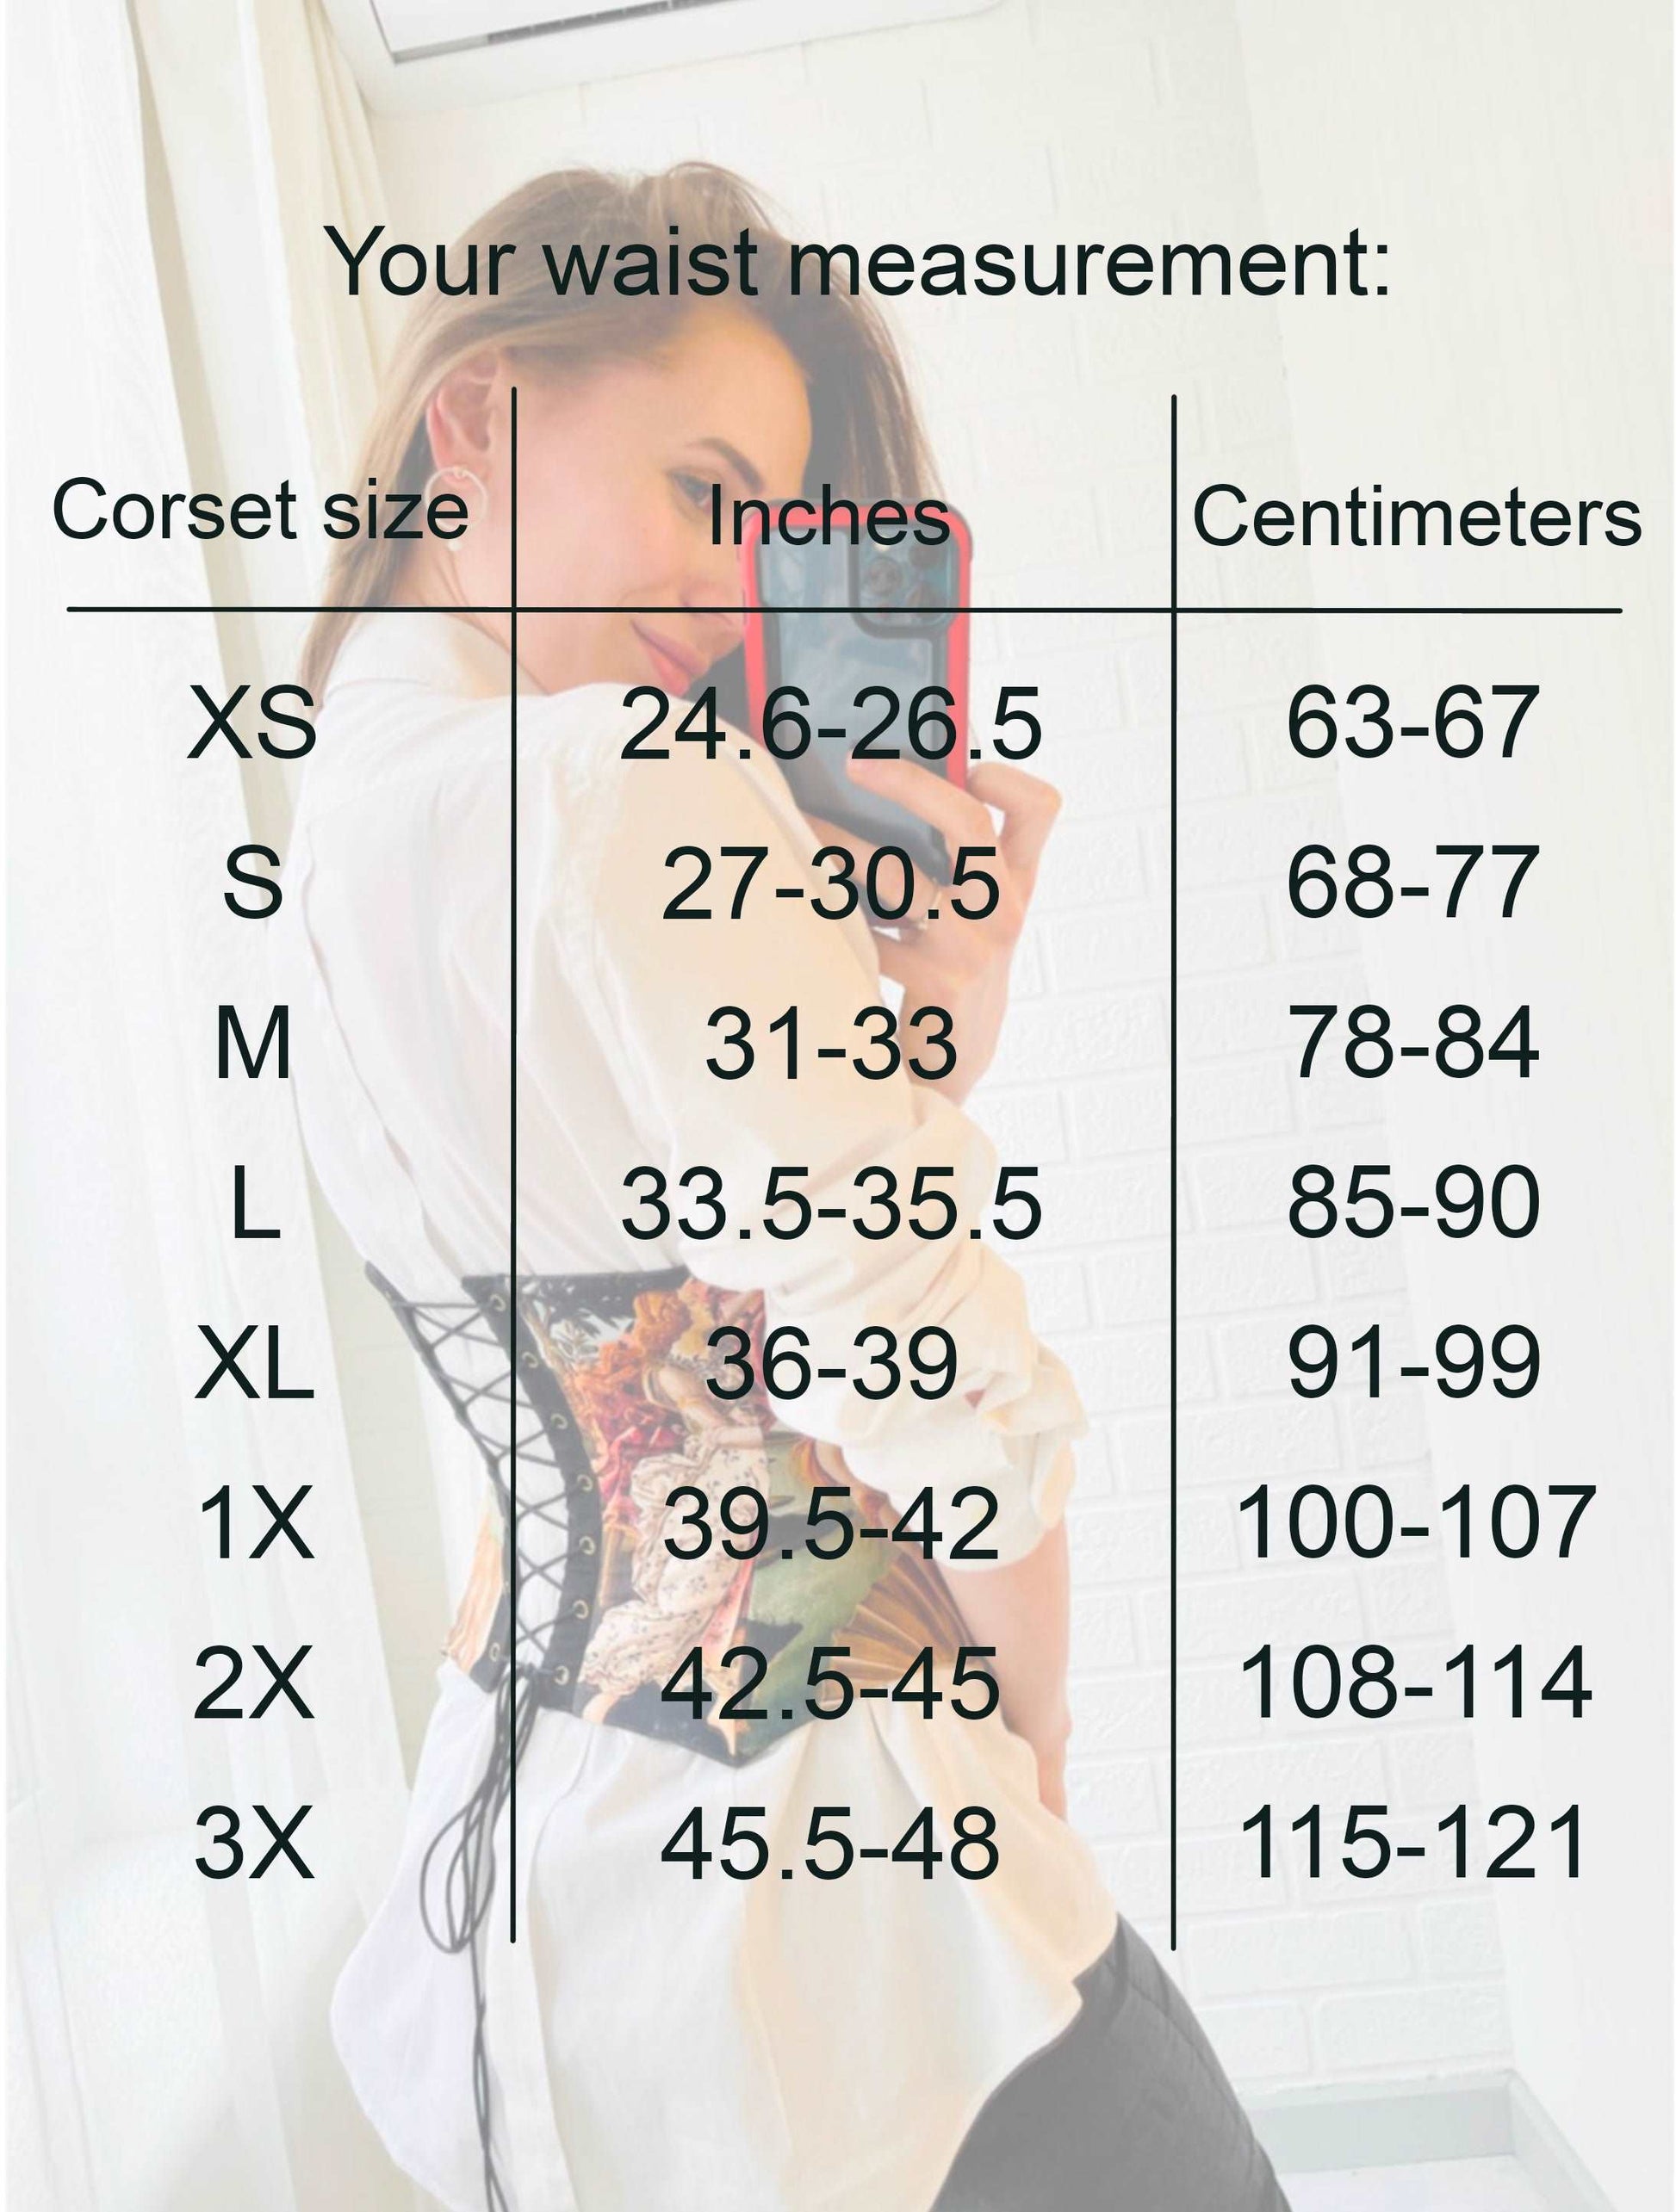 Size chart for corsets size and waist measurement